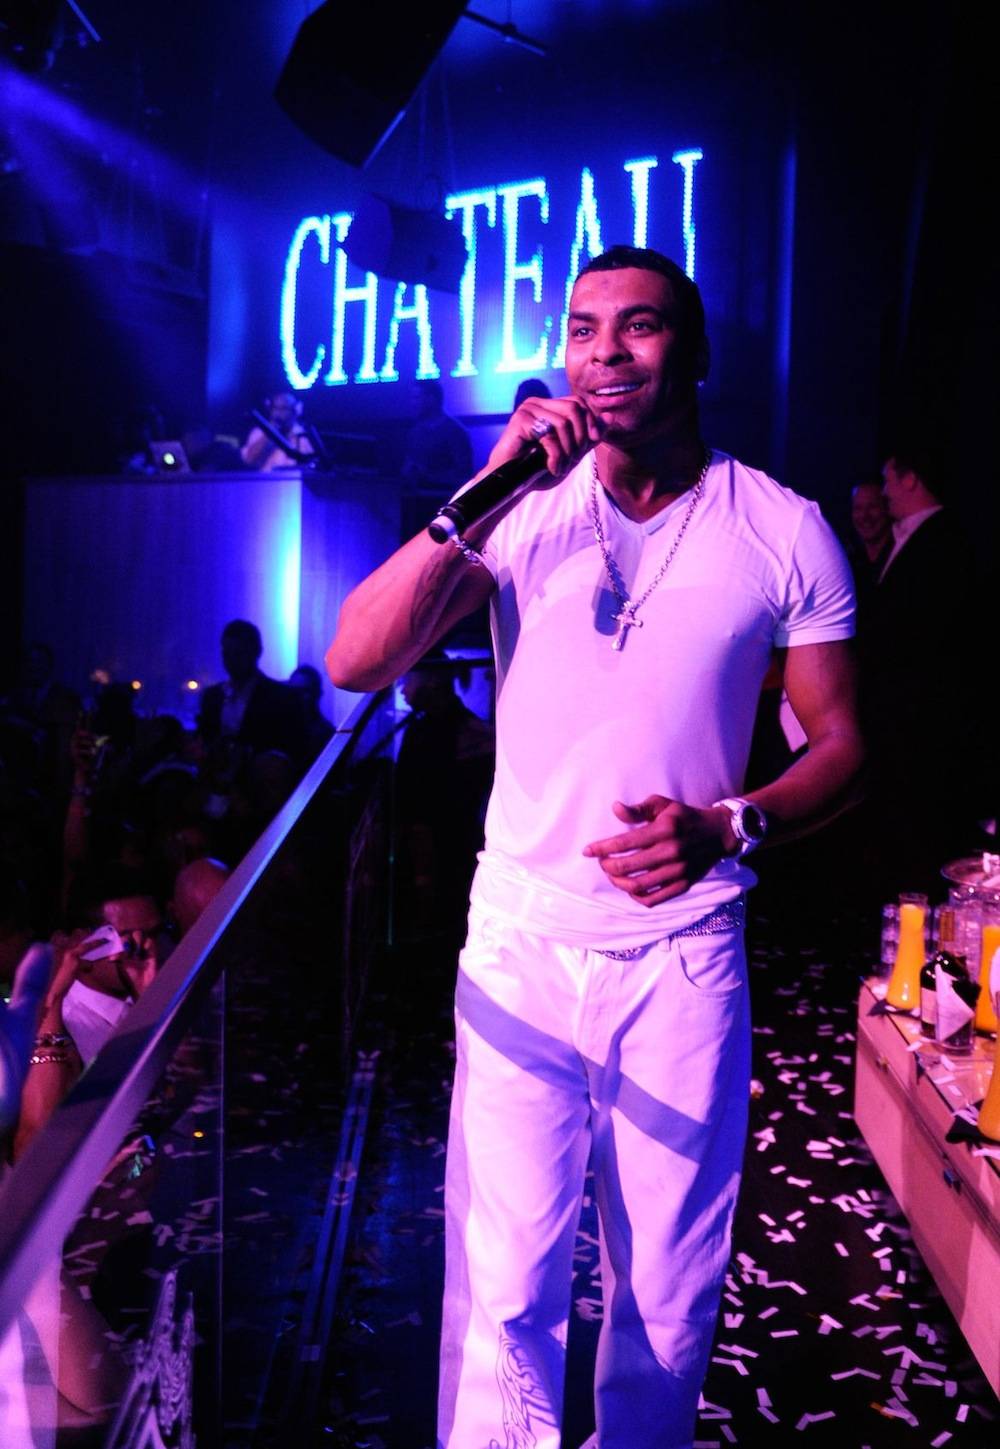 Sultry R&B Lyricist Ginuwine Performs For A Sold Out Crowd At Chateau Nightclub & Gardens During Labor Day Weekend